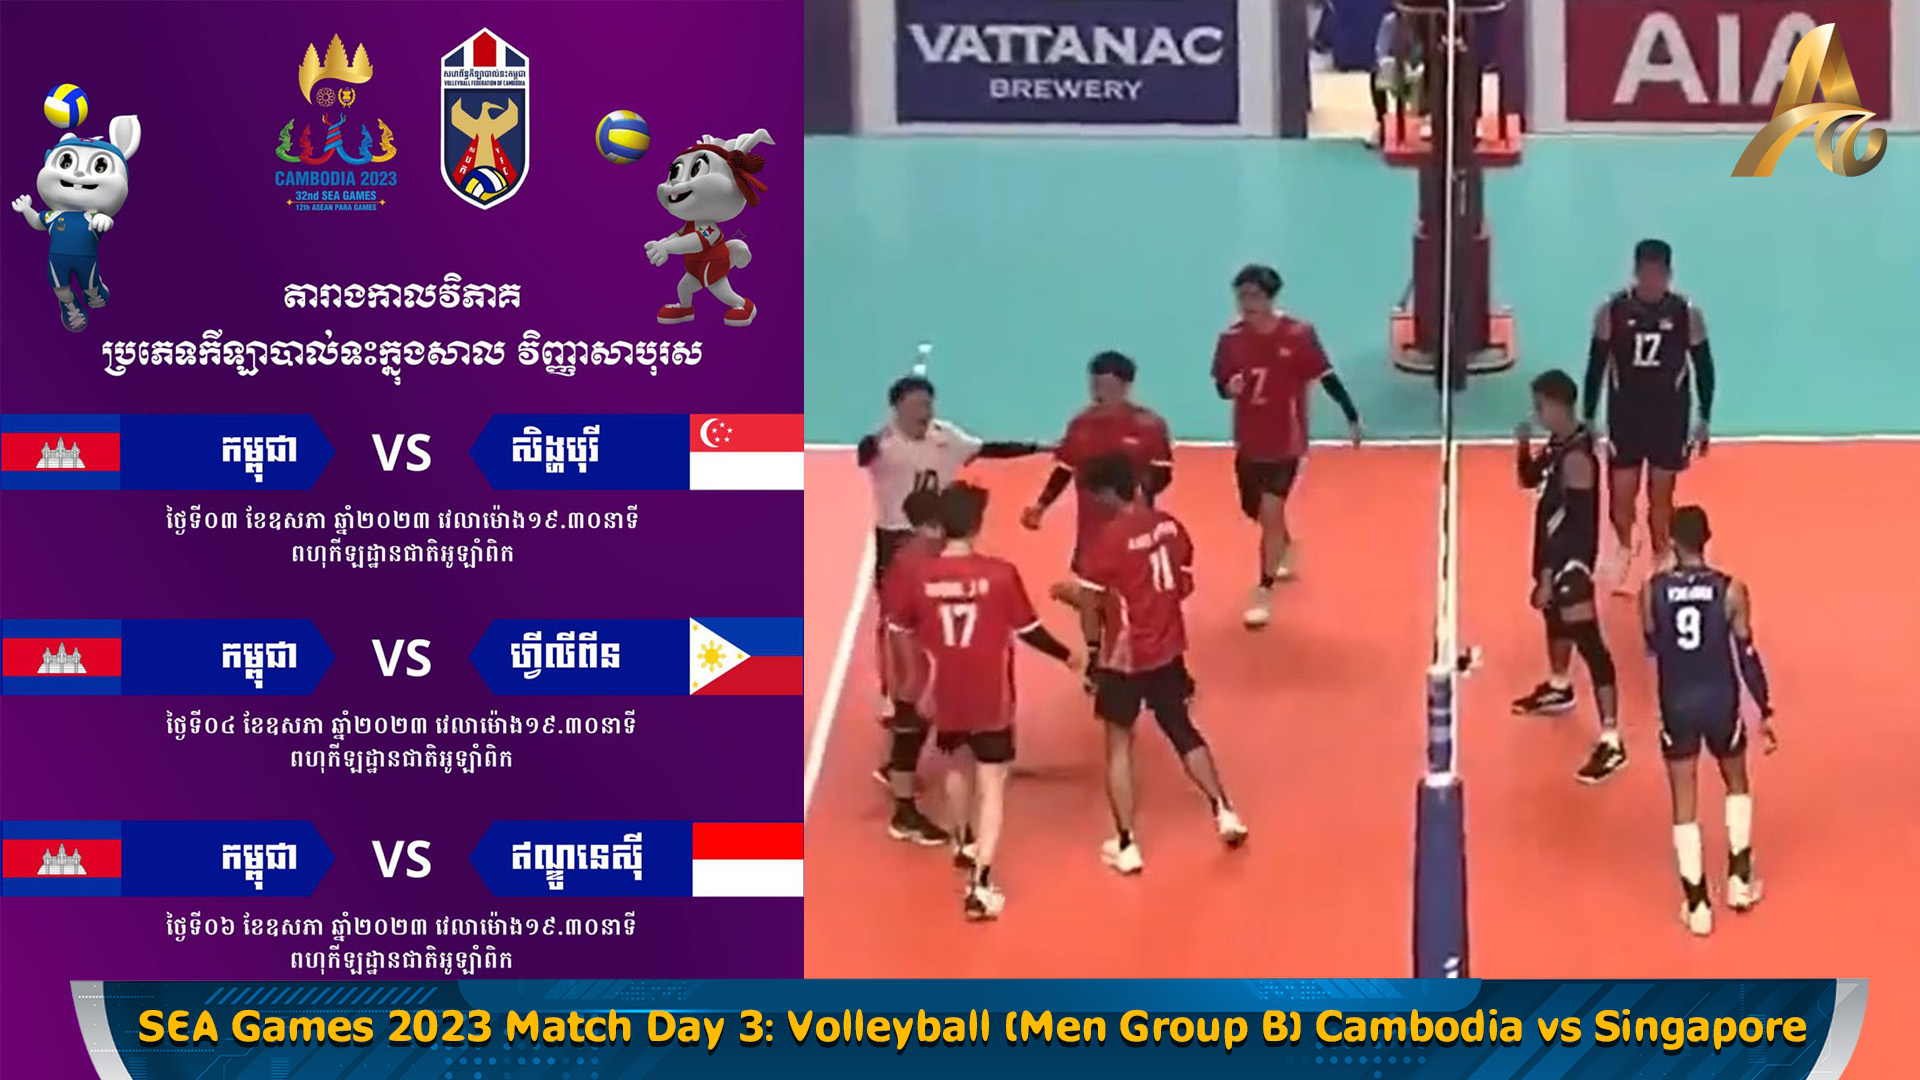 WATCH LIVE SEA Games 2023 Match Day 3 Volleyball (Men Group B) Cambodia vs Singapore